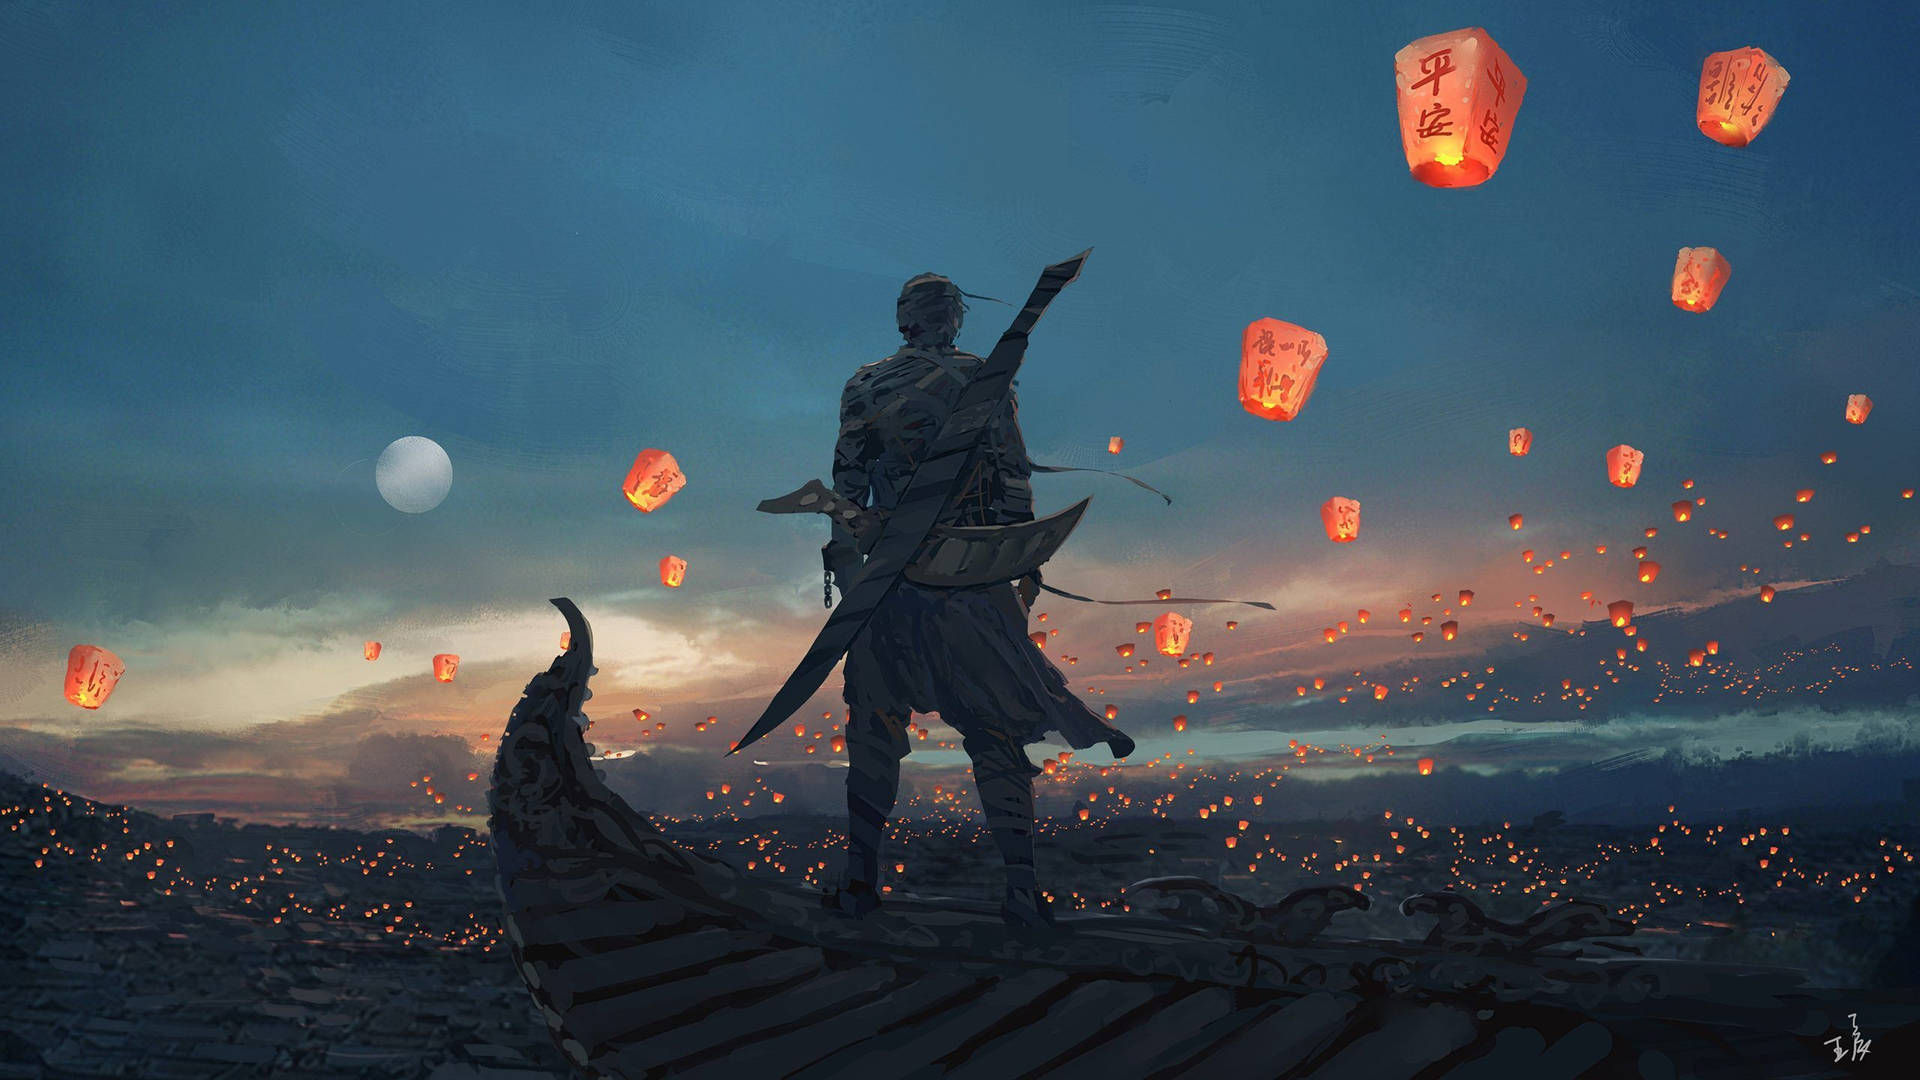 Man with sword on his back looking at hundreds of red orange sky lanterns floating in the sky during dusk art. 